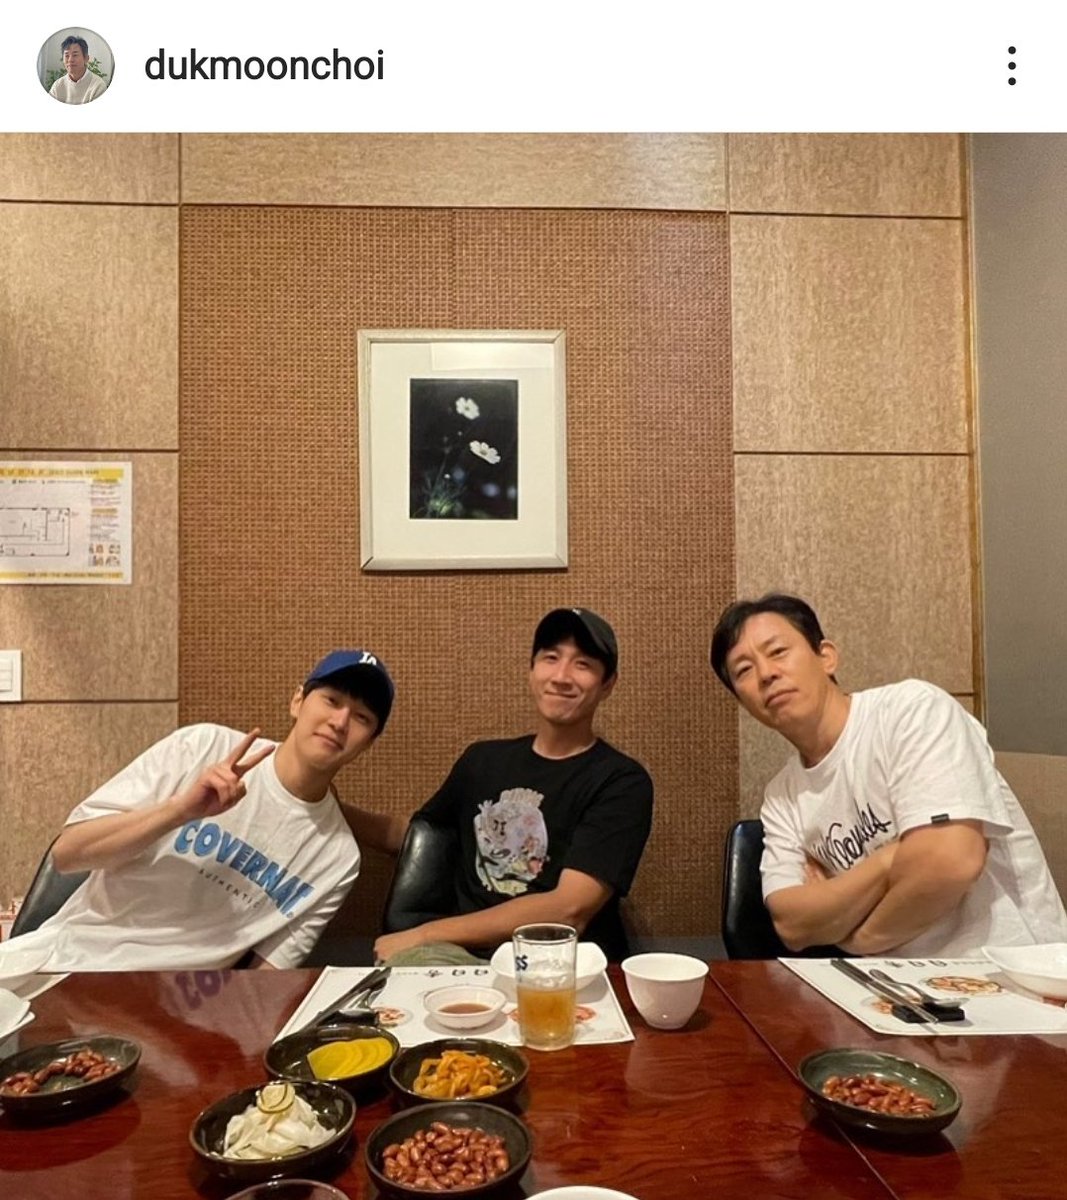 #Payback Hodu trio 😁💖

Eun Yong, Jang Tae Chun, and Nam Sang Il are having a hearty meal before continuing their fight 🔥 

Can't wait to meet them again in #Payback, available on @PrimeVideo 

#LeeSunKyun
#KangYouSeok
#ChoiDukMoon

From Choi Duk Moon IG